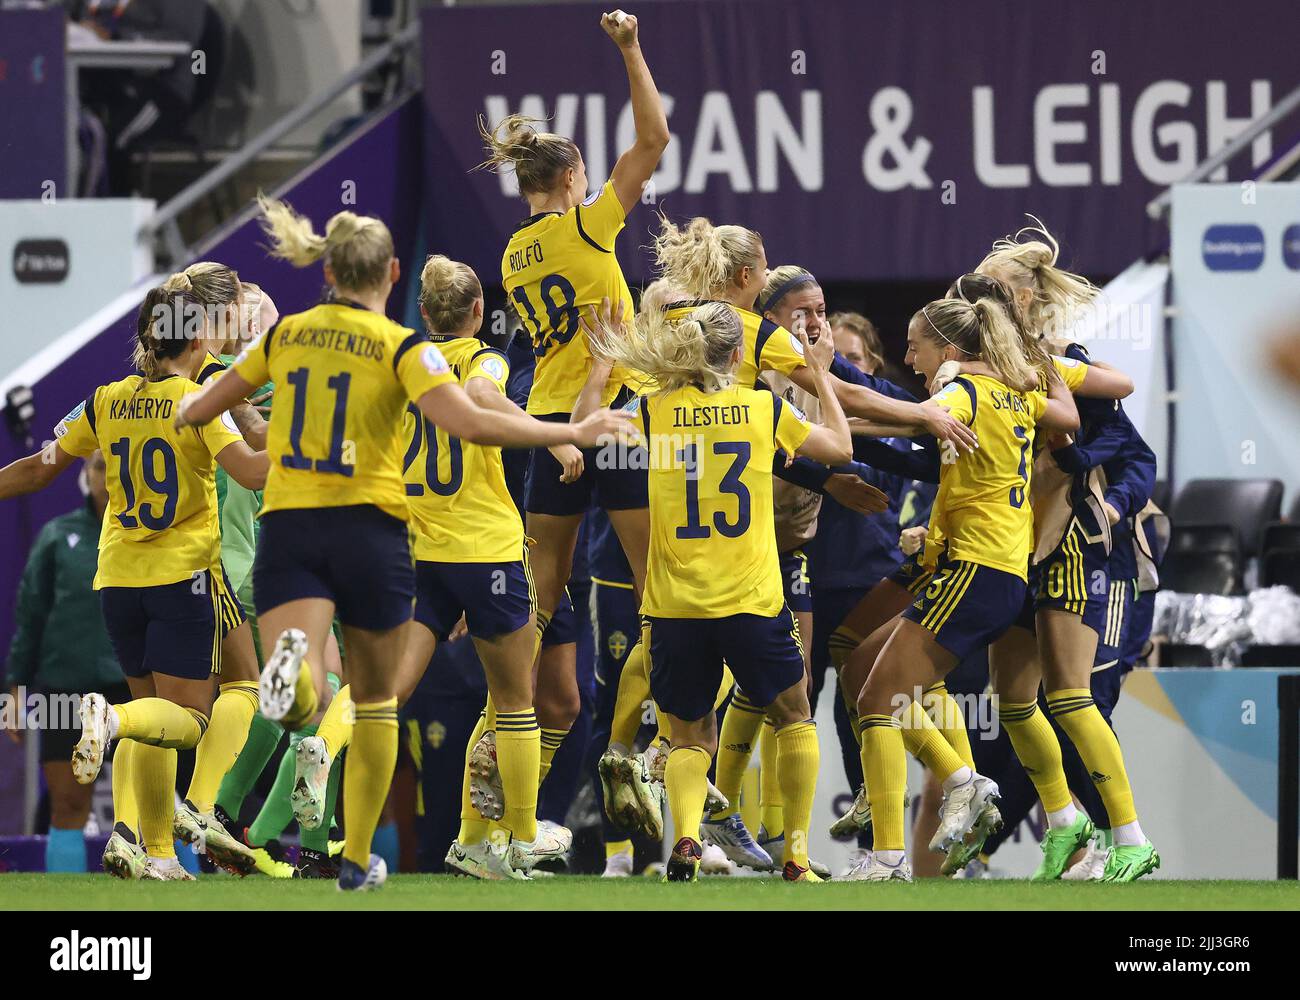 Leigh, UK. 22nd July, 2022. Leigh, England, 22nd July 2022.   Linda Sembrant of Sweden (R) celebrates scoring the winning goal during the UEFA Women's European Championship 2022 match at Leigh Sports Village, Leigh. Picture credit should read: Darren Staples / Sportimage Credit: Sportimage/Alamy Live News Stock Photo